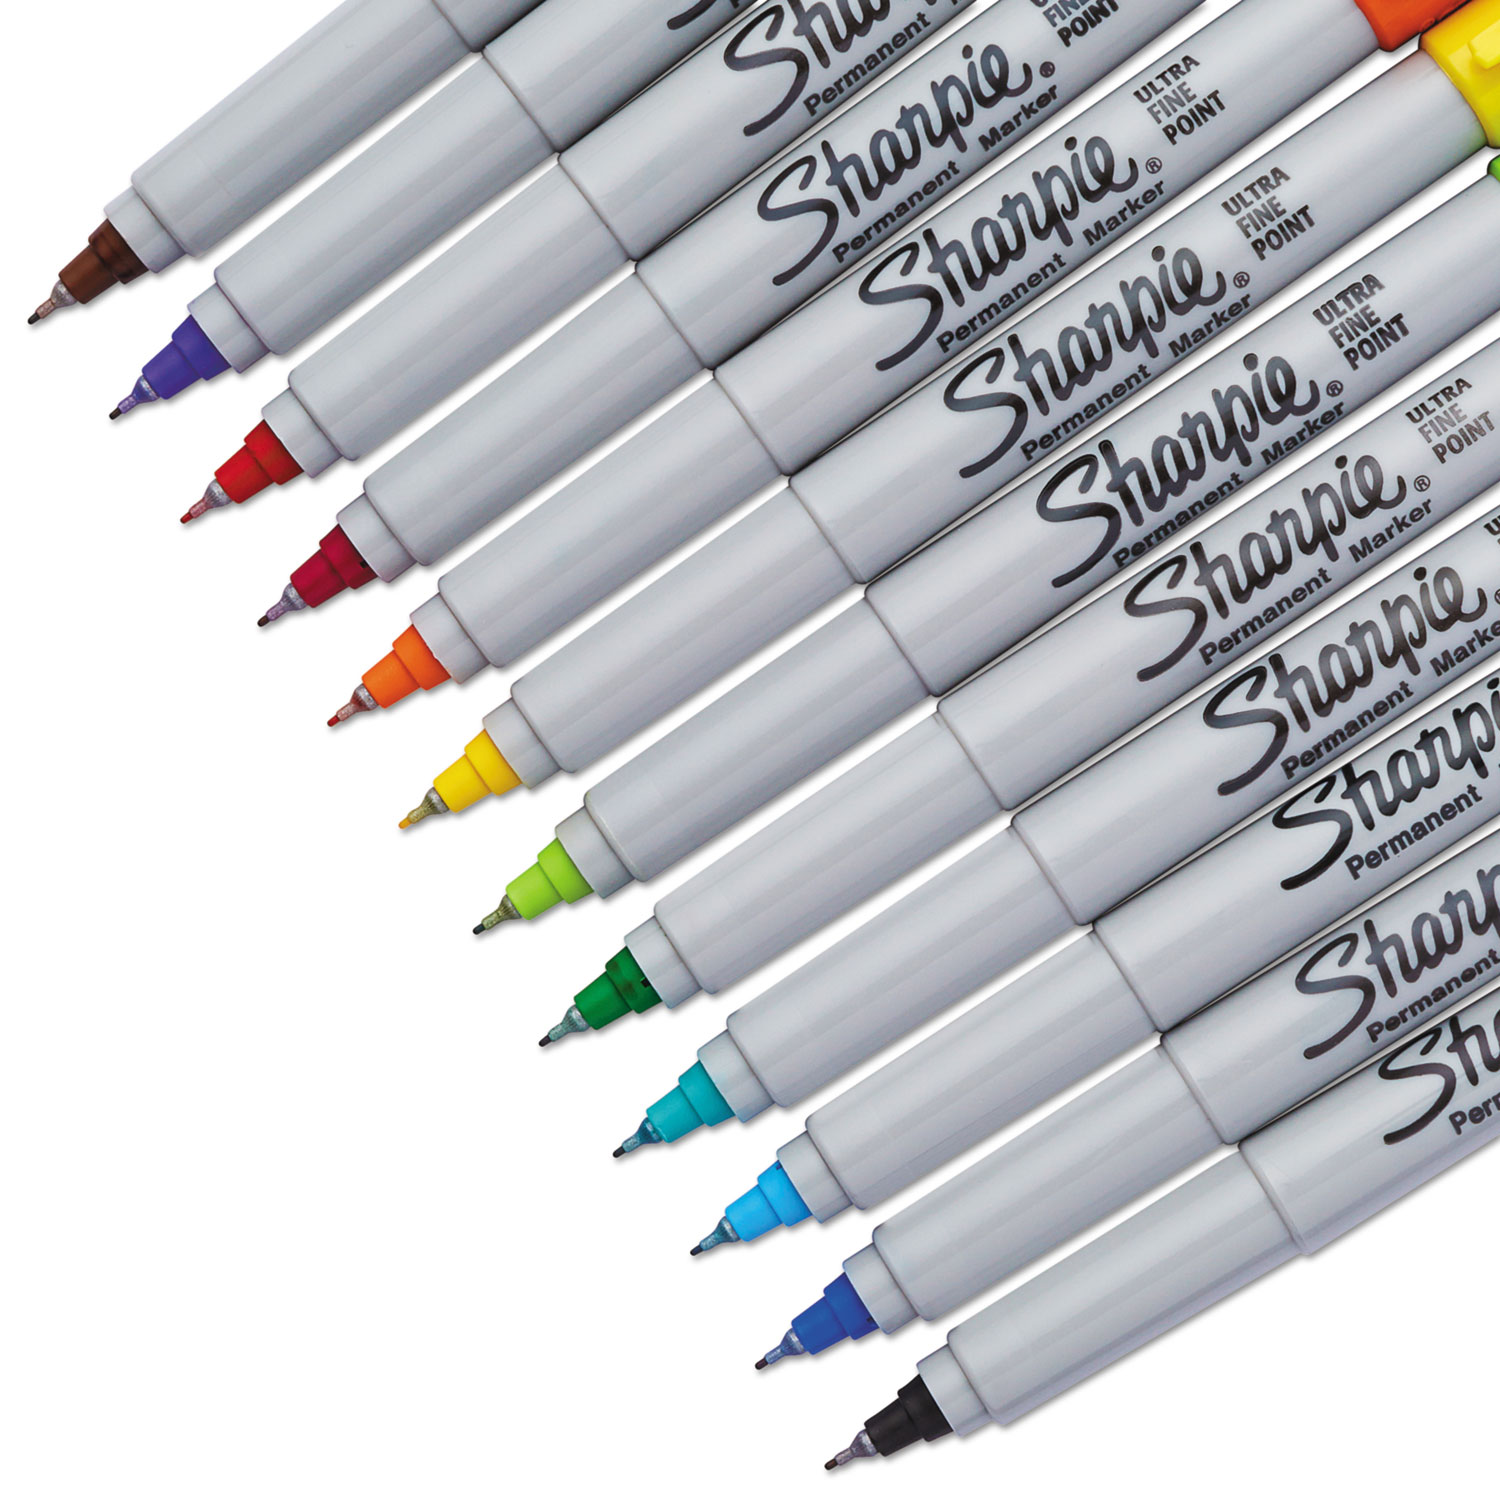 Sharpie Mystic Gems Markers, Ultra-Fine Needle Tip, Assorted, 24/Pack